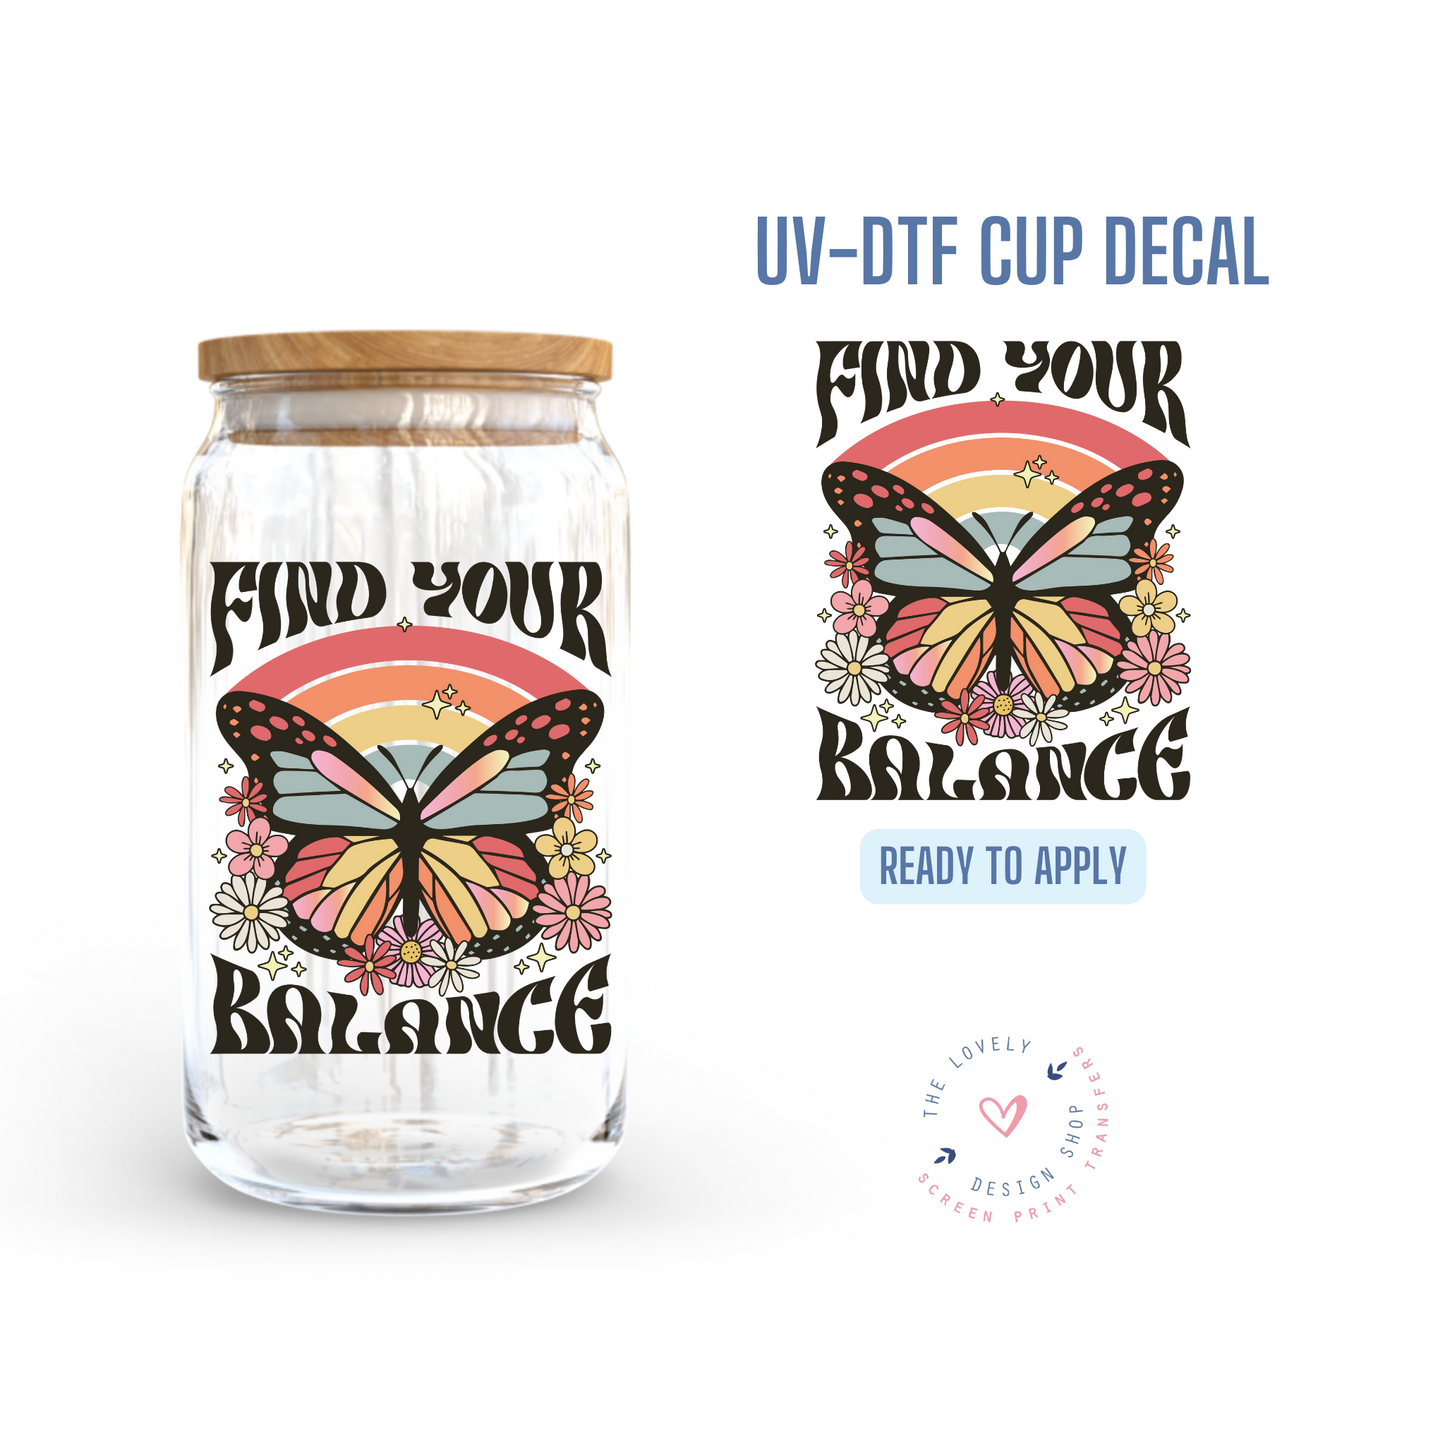 Find Your Balance - UV DTF Cup Decal (Ready to Ship) Apr 22